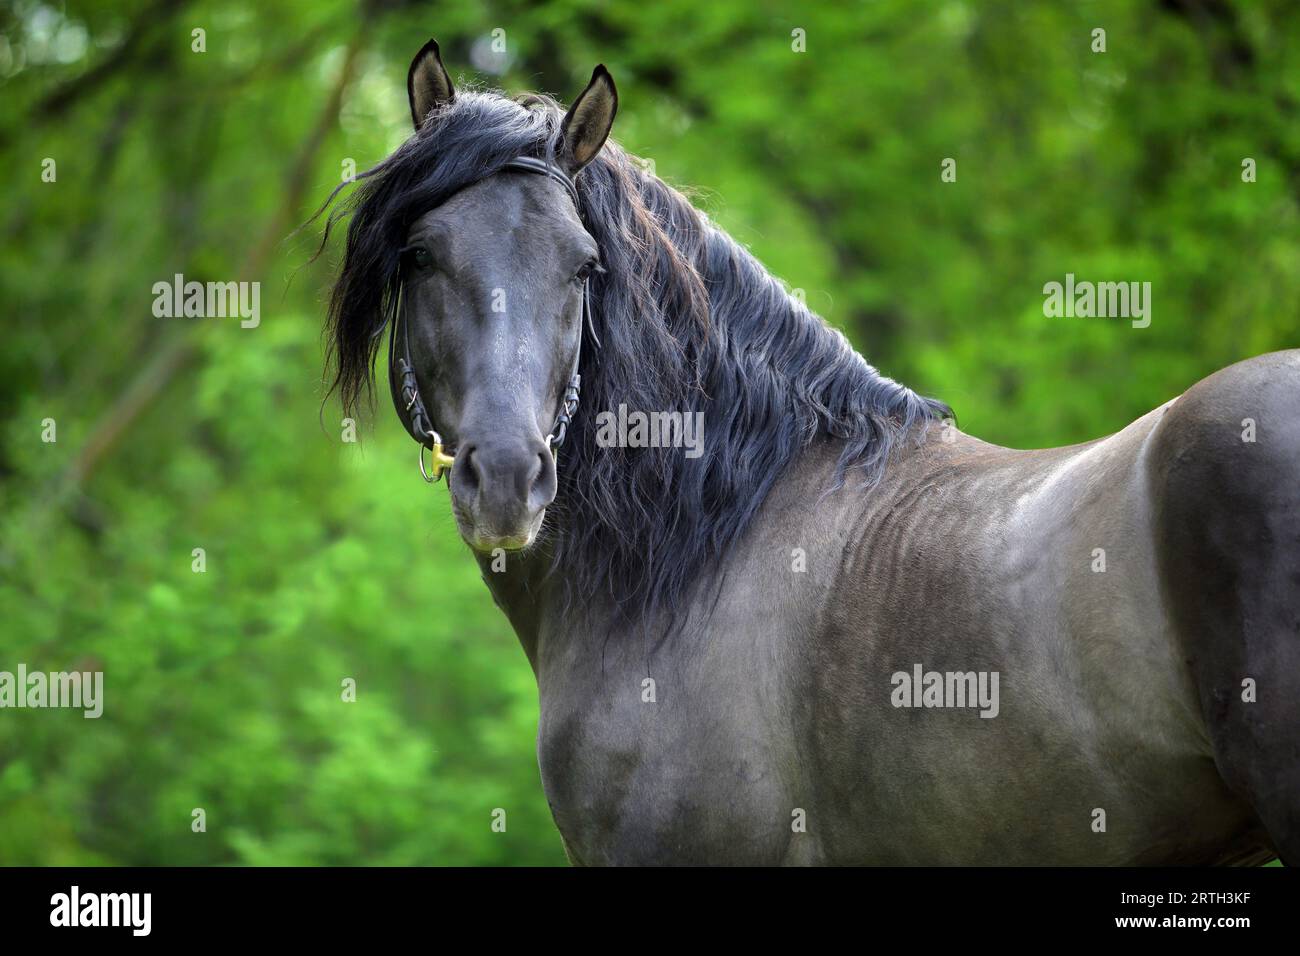 Black Andalusian horse portrait near the summer ranch Stock Photo